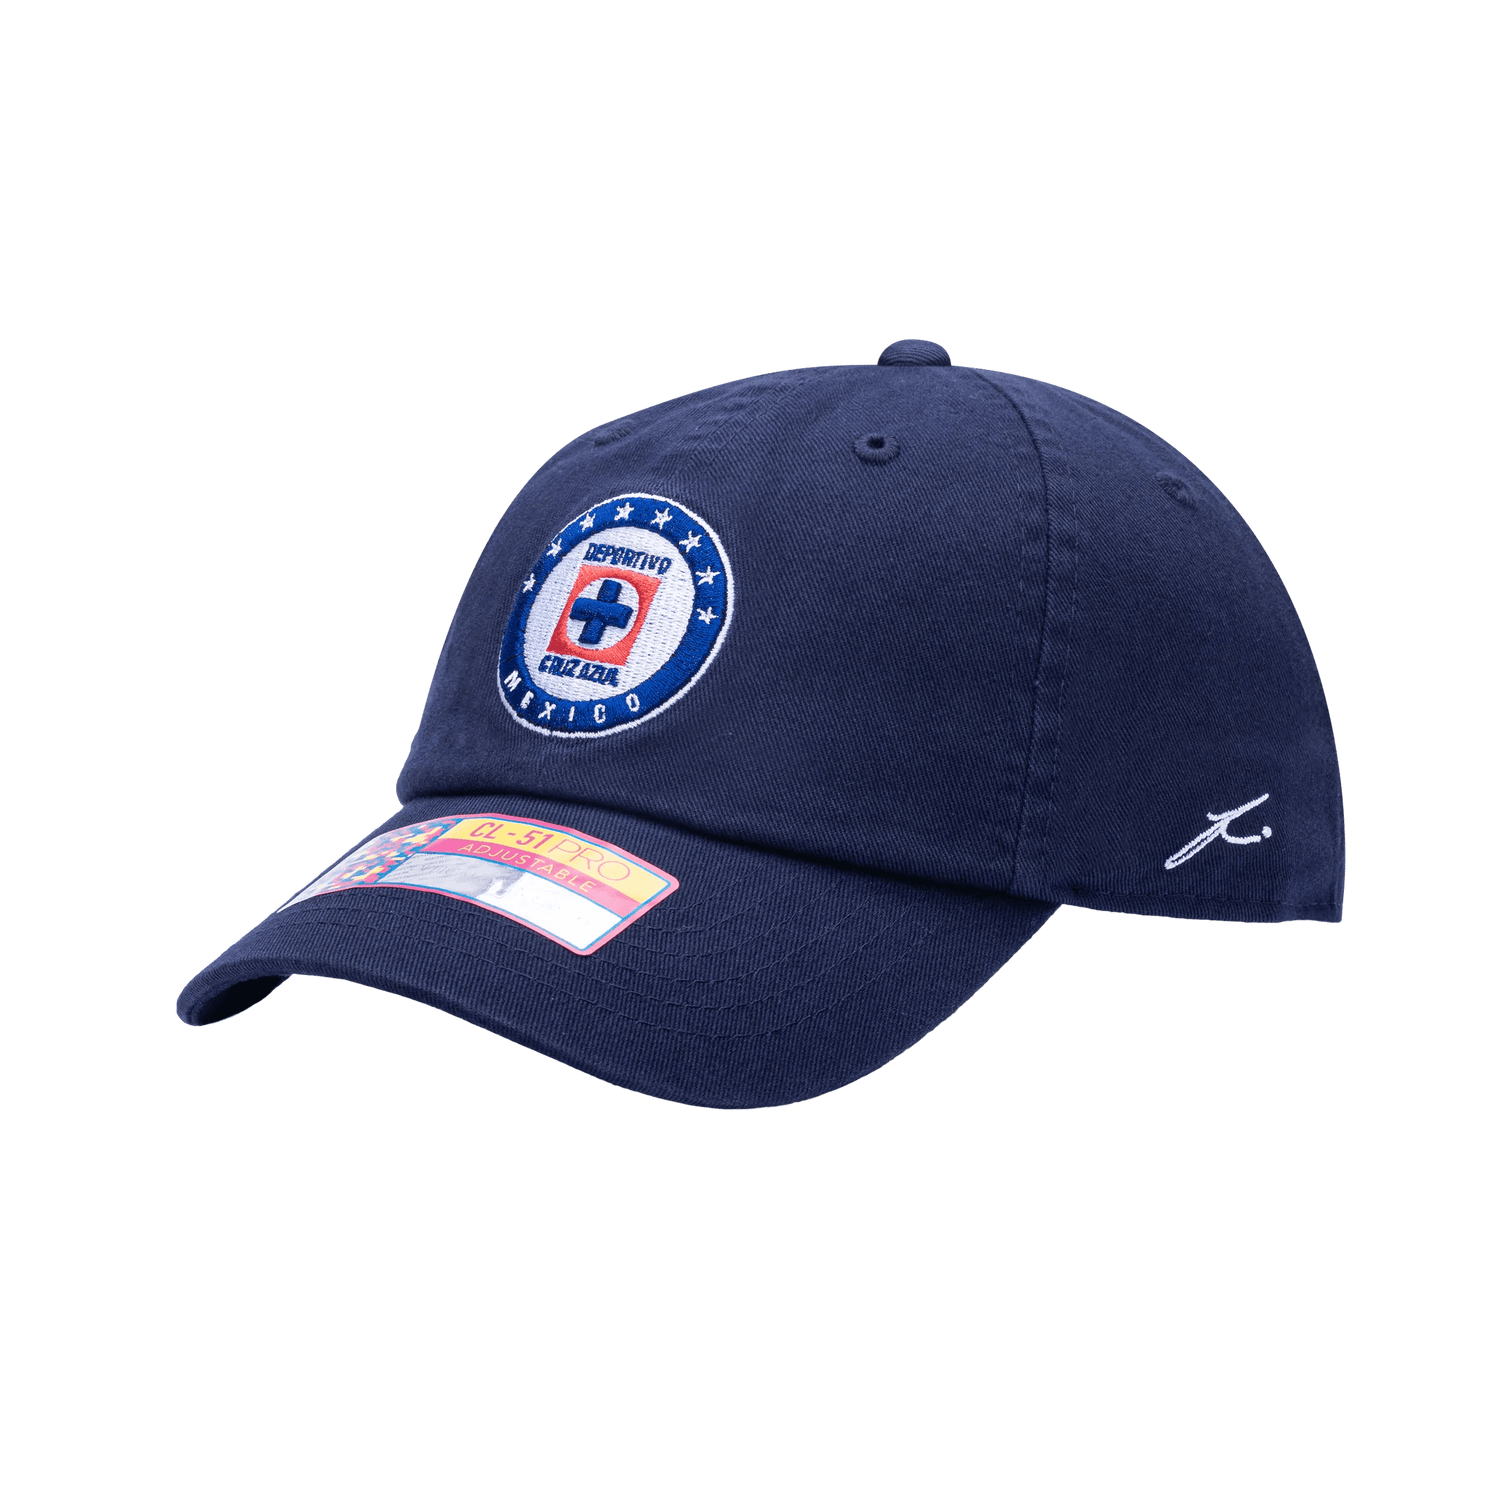 FI Collection Club Cruz Azul Bambo Classic Hat (Lateral - Side 1)